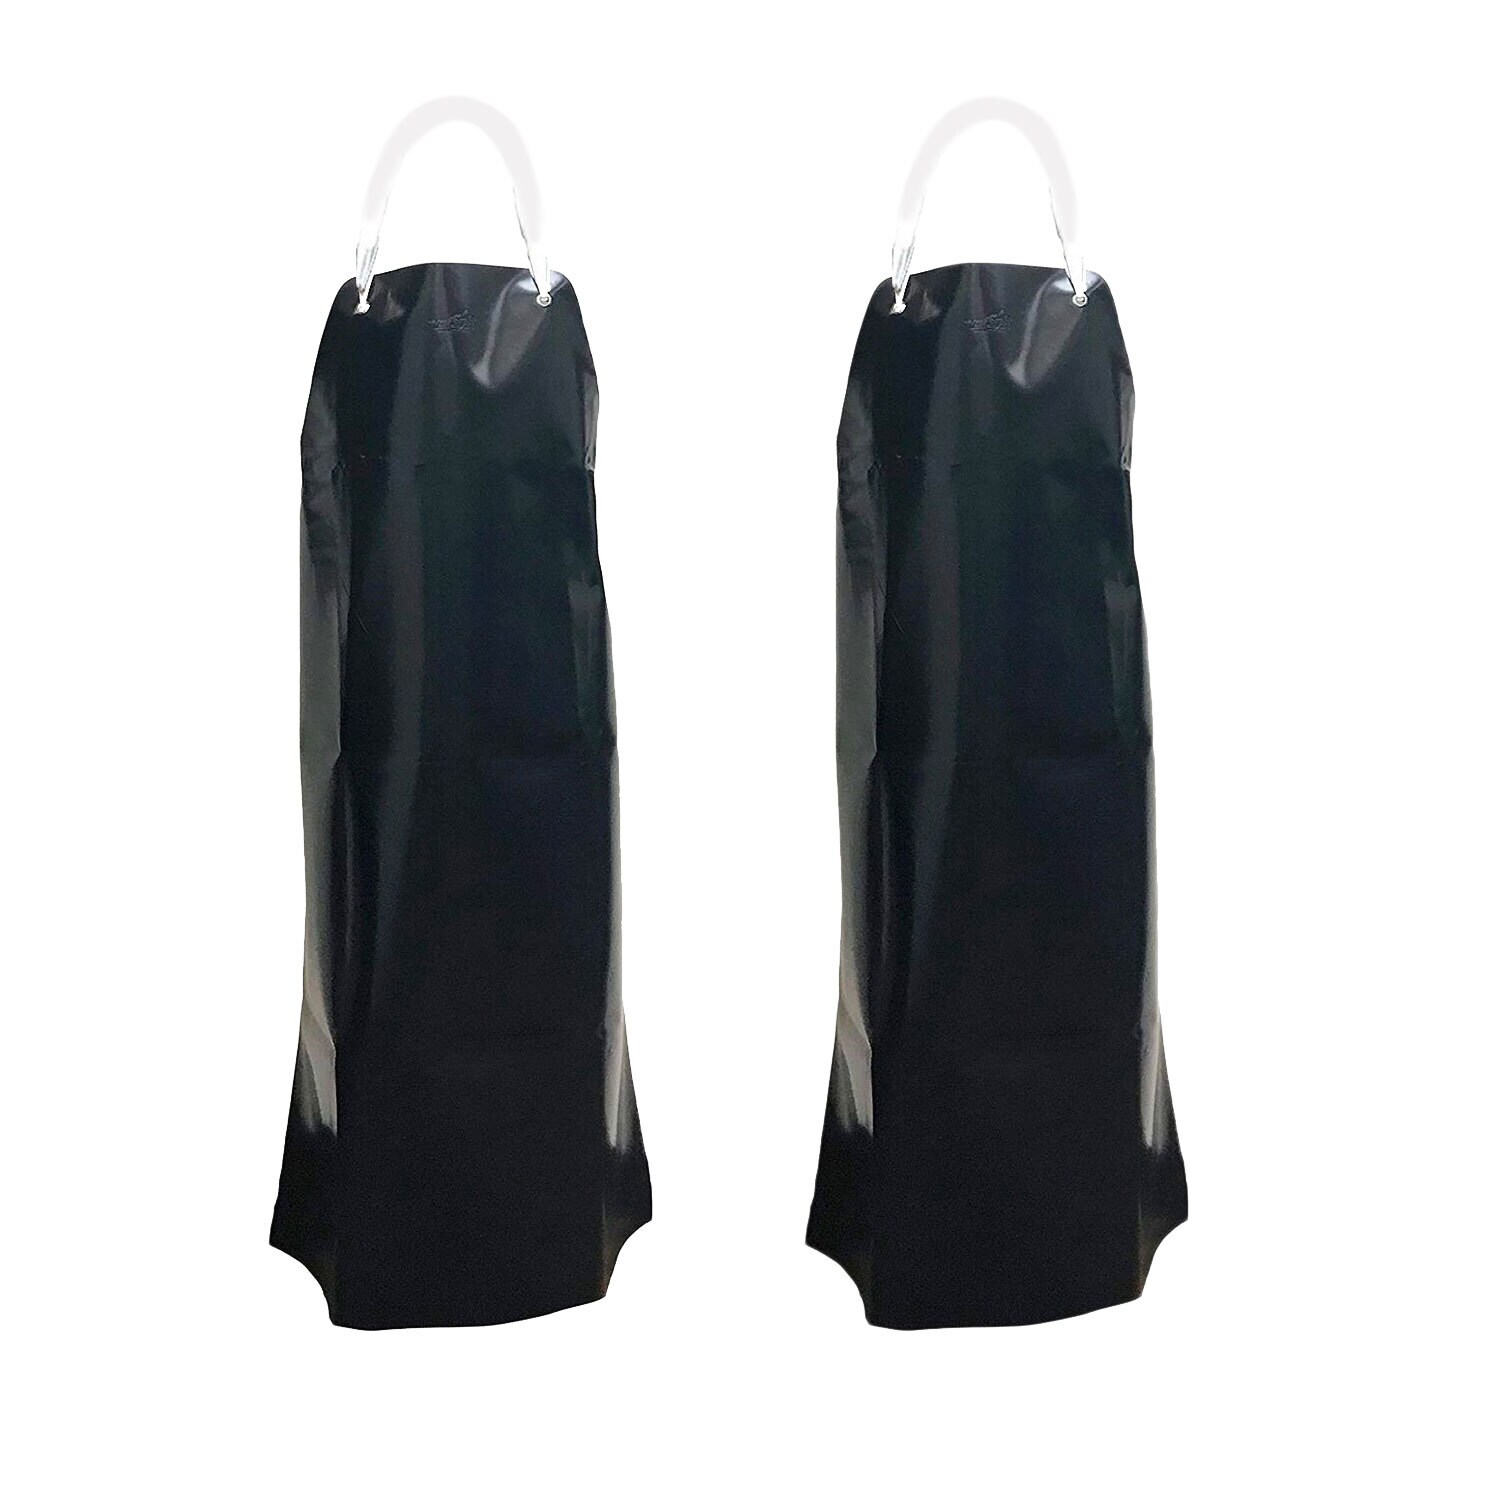 KLEEN HANDLER 47 x 31; Heavy Duty Vinyl Black Dishwashing Apron, Industrial  Cleaning, Chemical-oil Resistant, (pack Of 2) in the Safety Accessories  department at Lowes.com